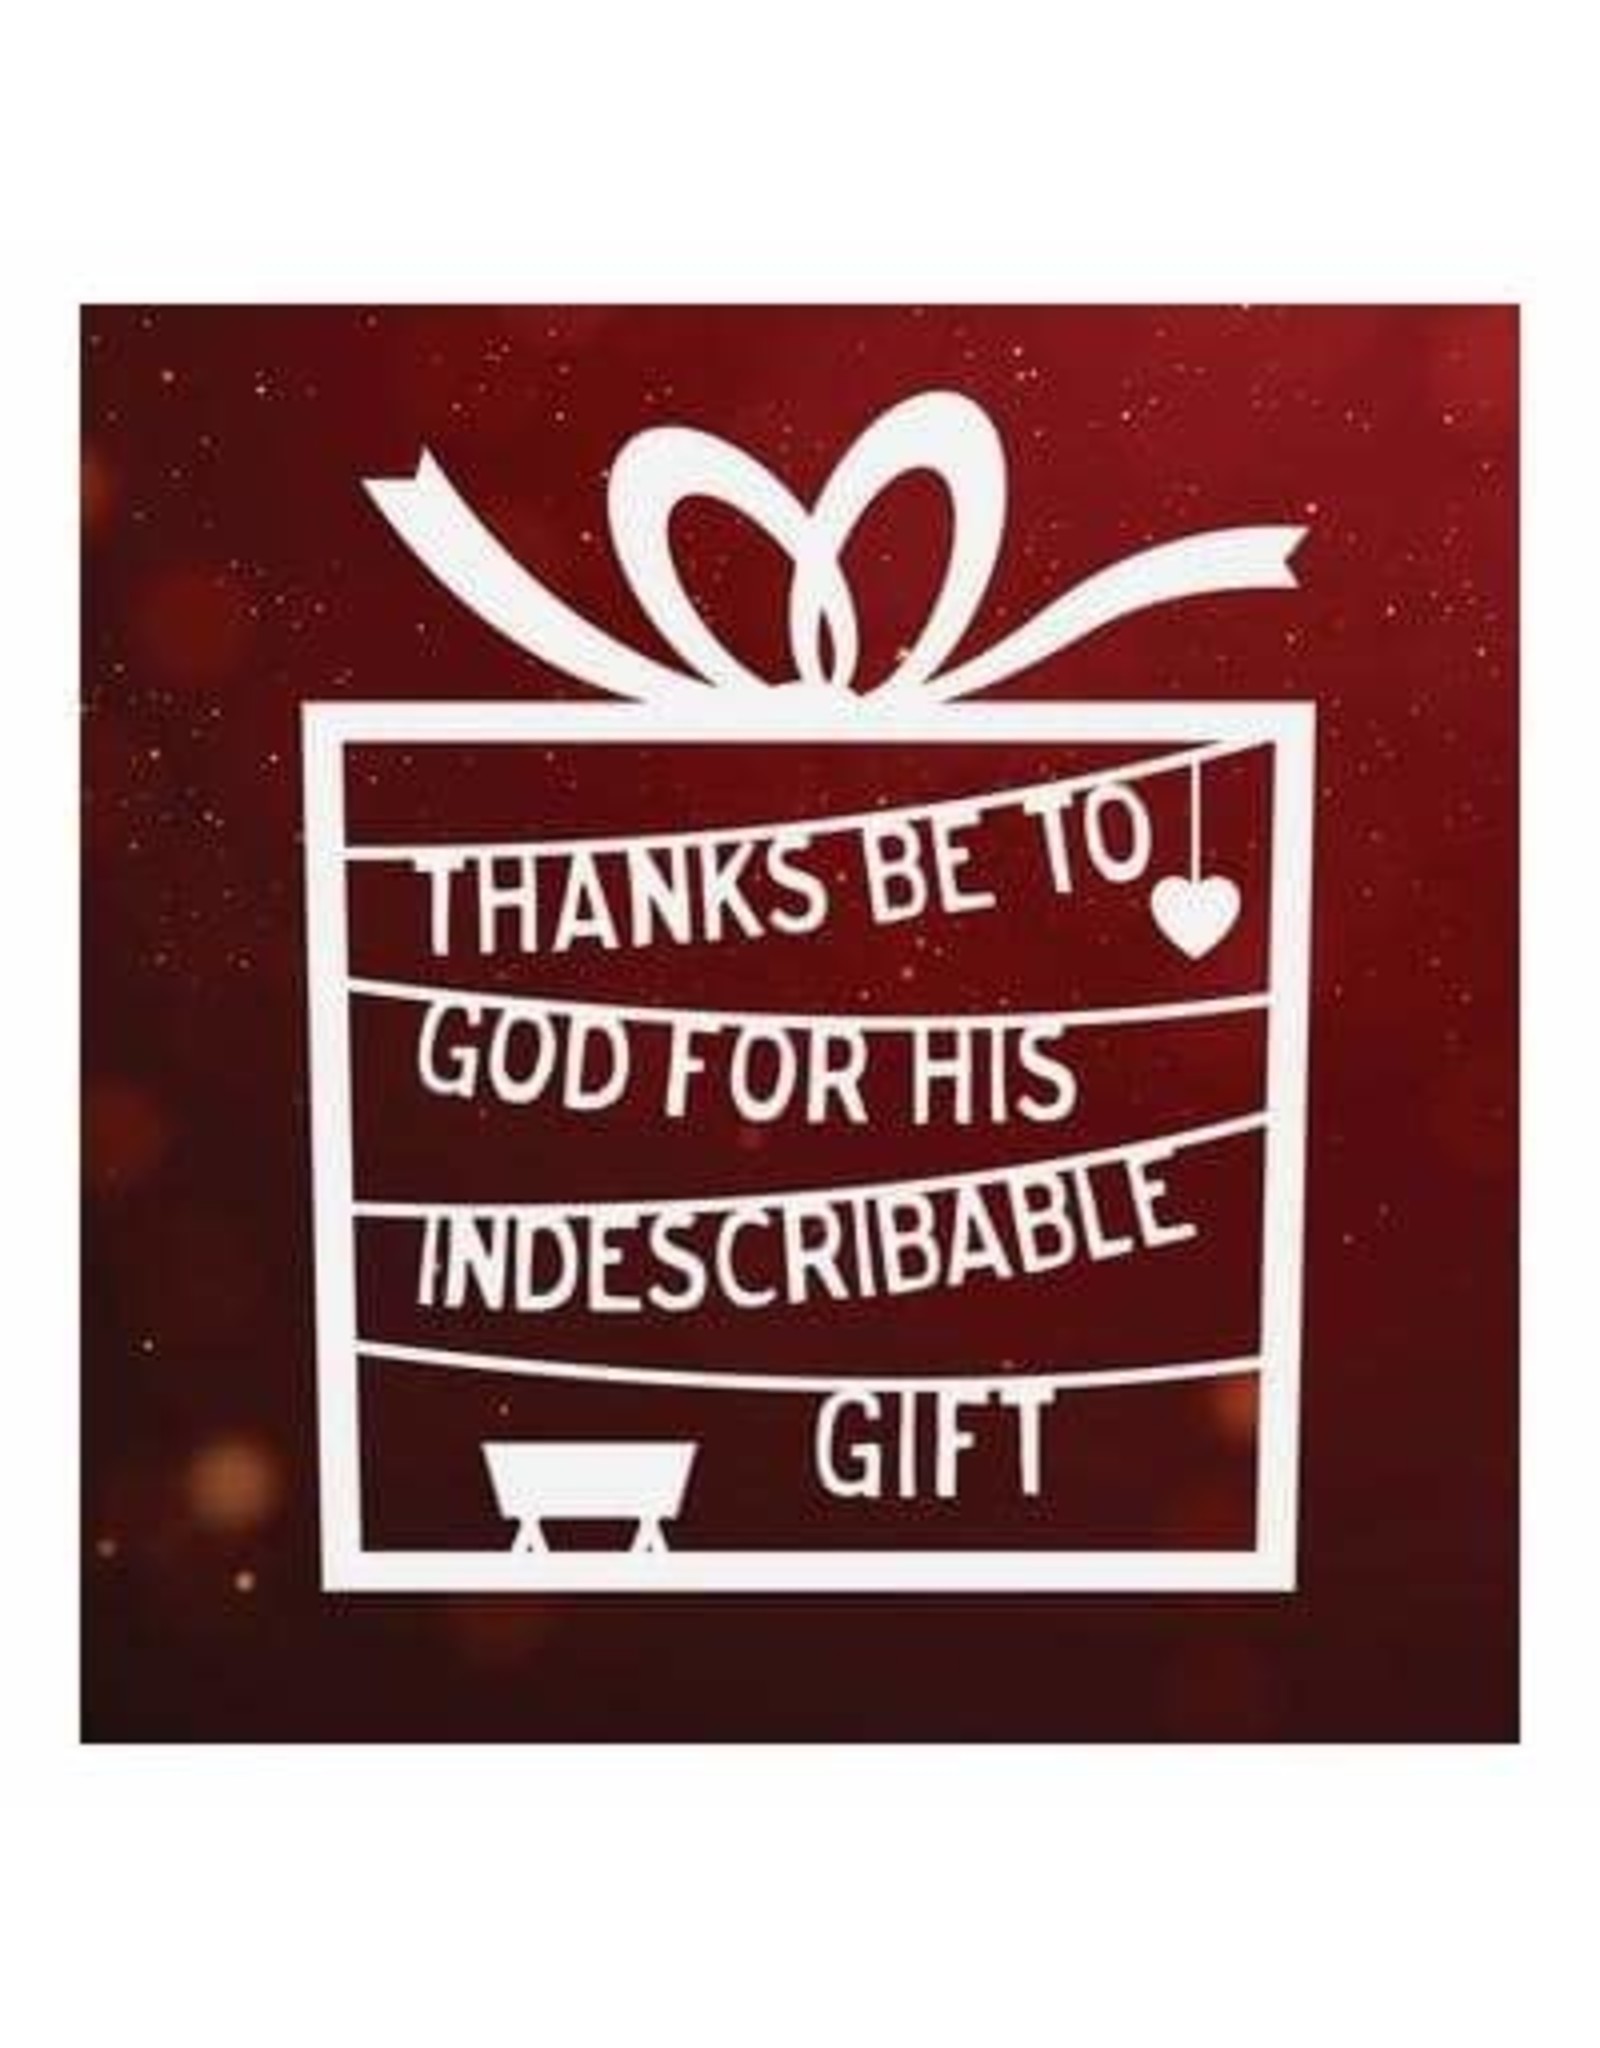 Thanks be to God for his Indescribable Gift! Christmas Card